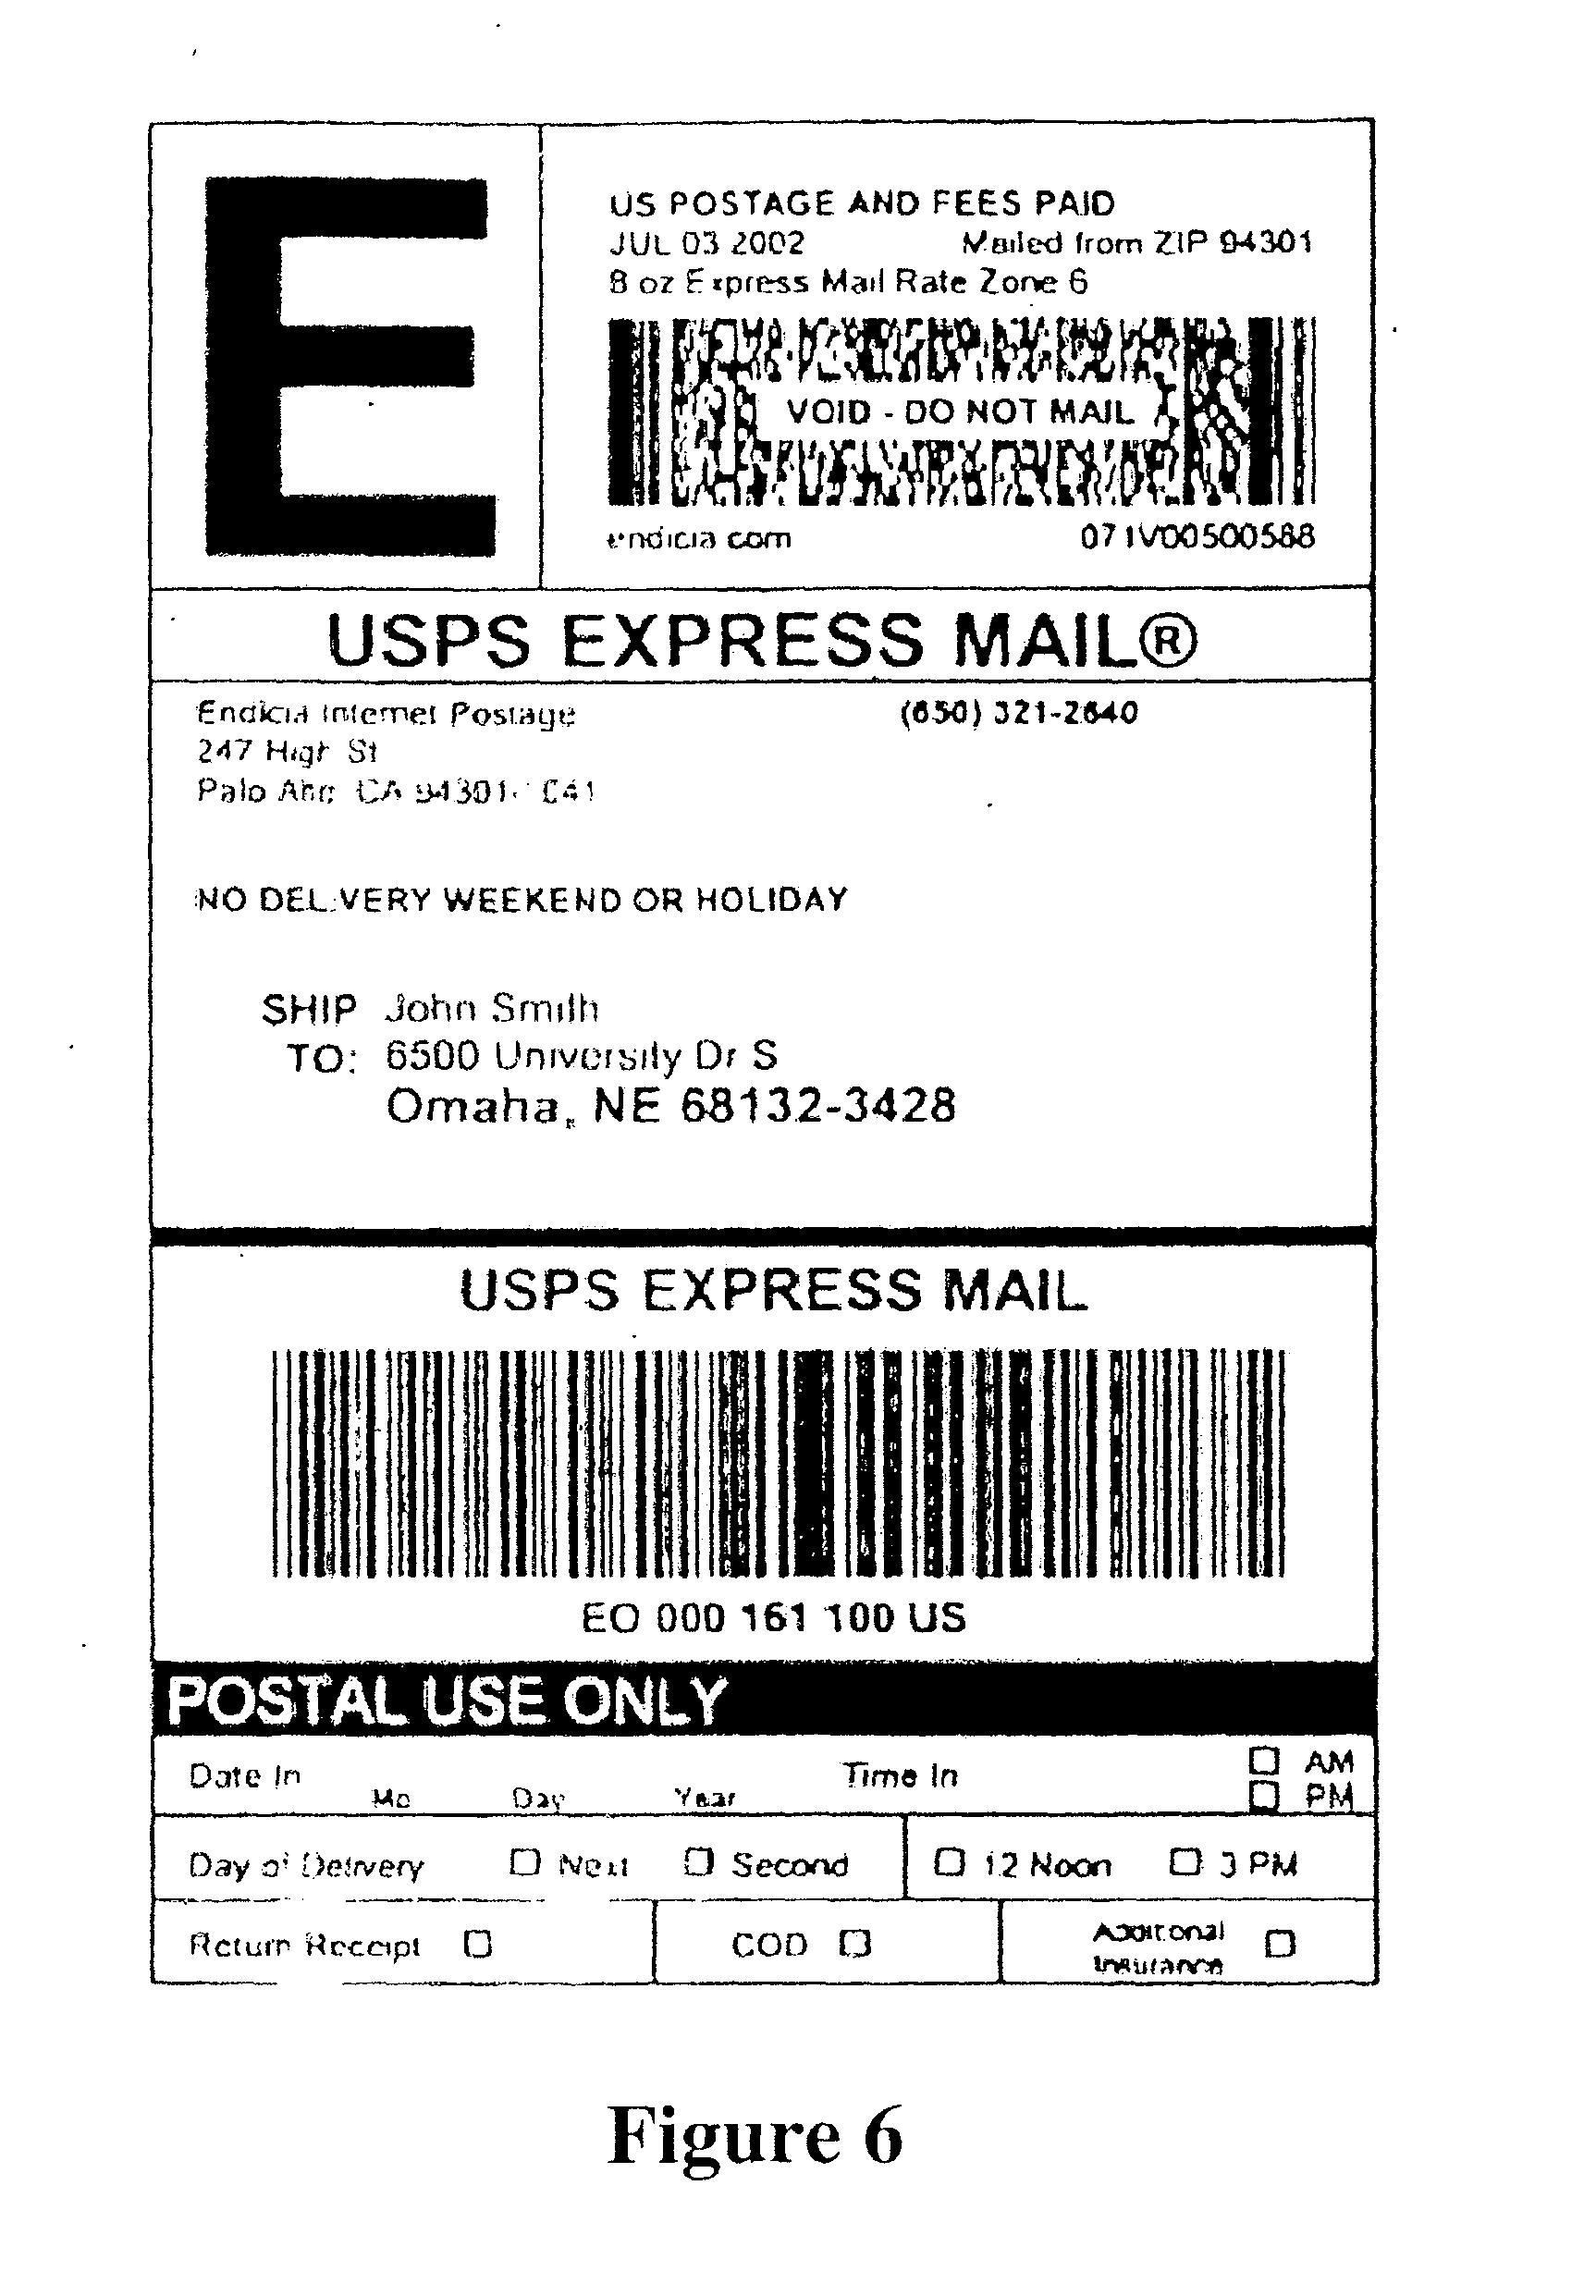 23 Usps Prepaid Shipping Label - Label Design Ideas 23 Intended For Package Shipping Label Template